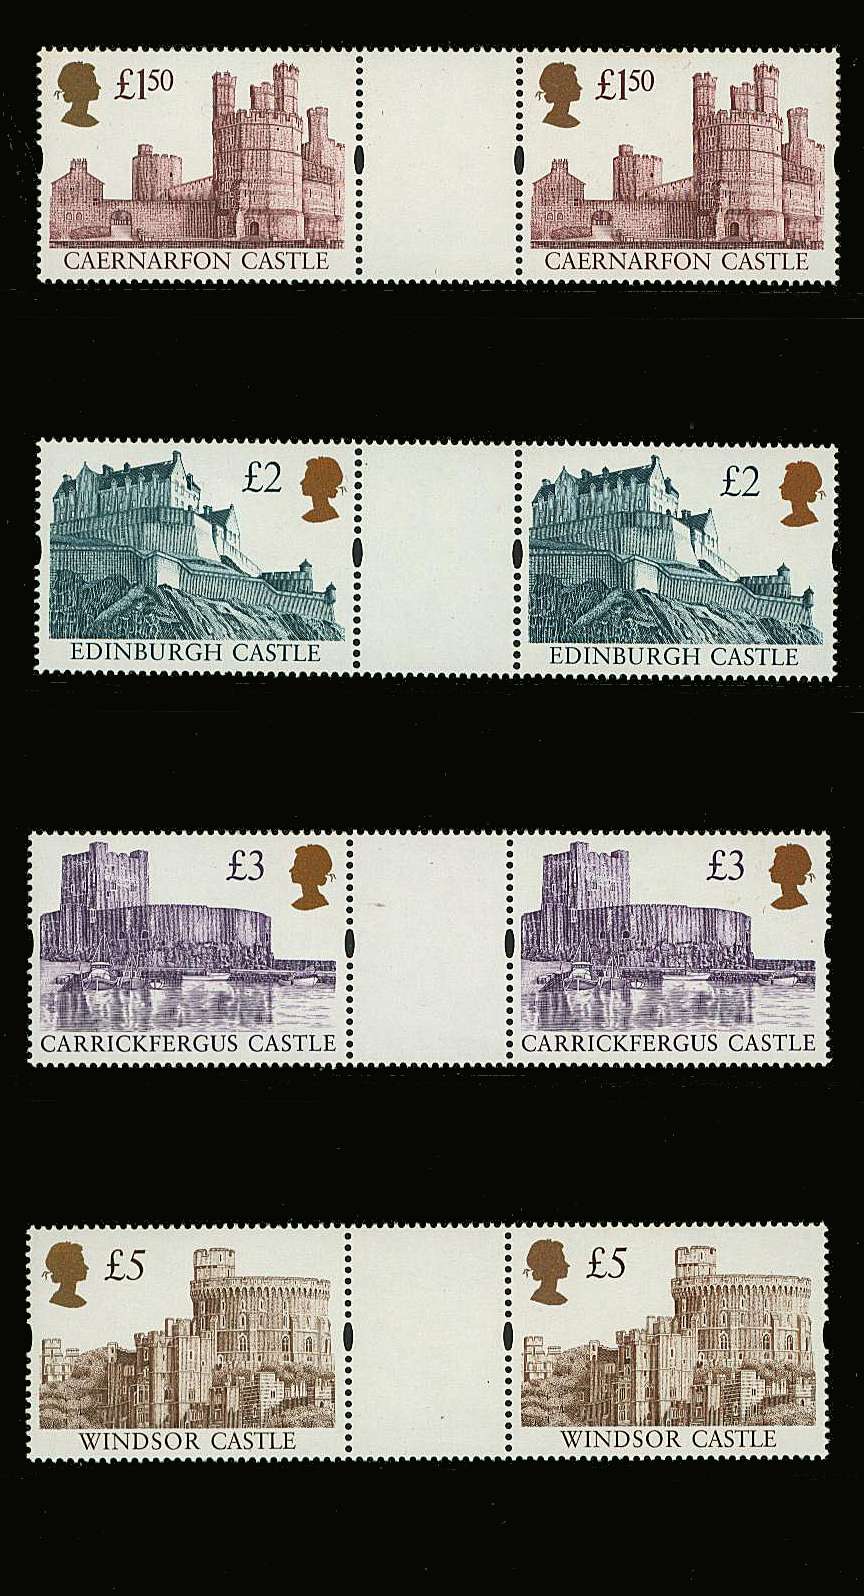 view larger image for SG 1993g-1996g (1997) - The ''Gold Head'' Castles set of four<br/>Printed by Enschedé <br/>in horizontal unfolded ''Gutter Pairs'' <br/>superb unmounted mint.<br/>A rare set to find!<br/>
SG Cat £175
